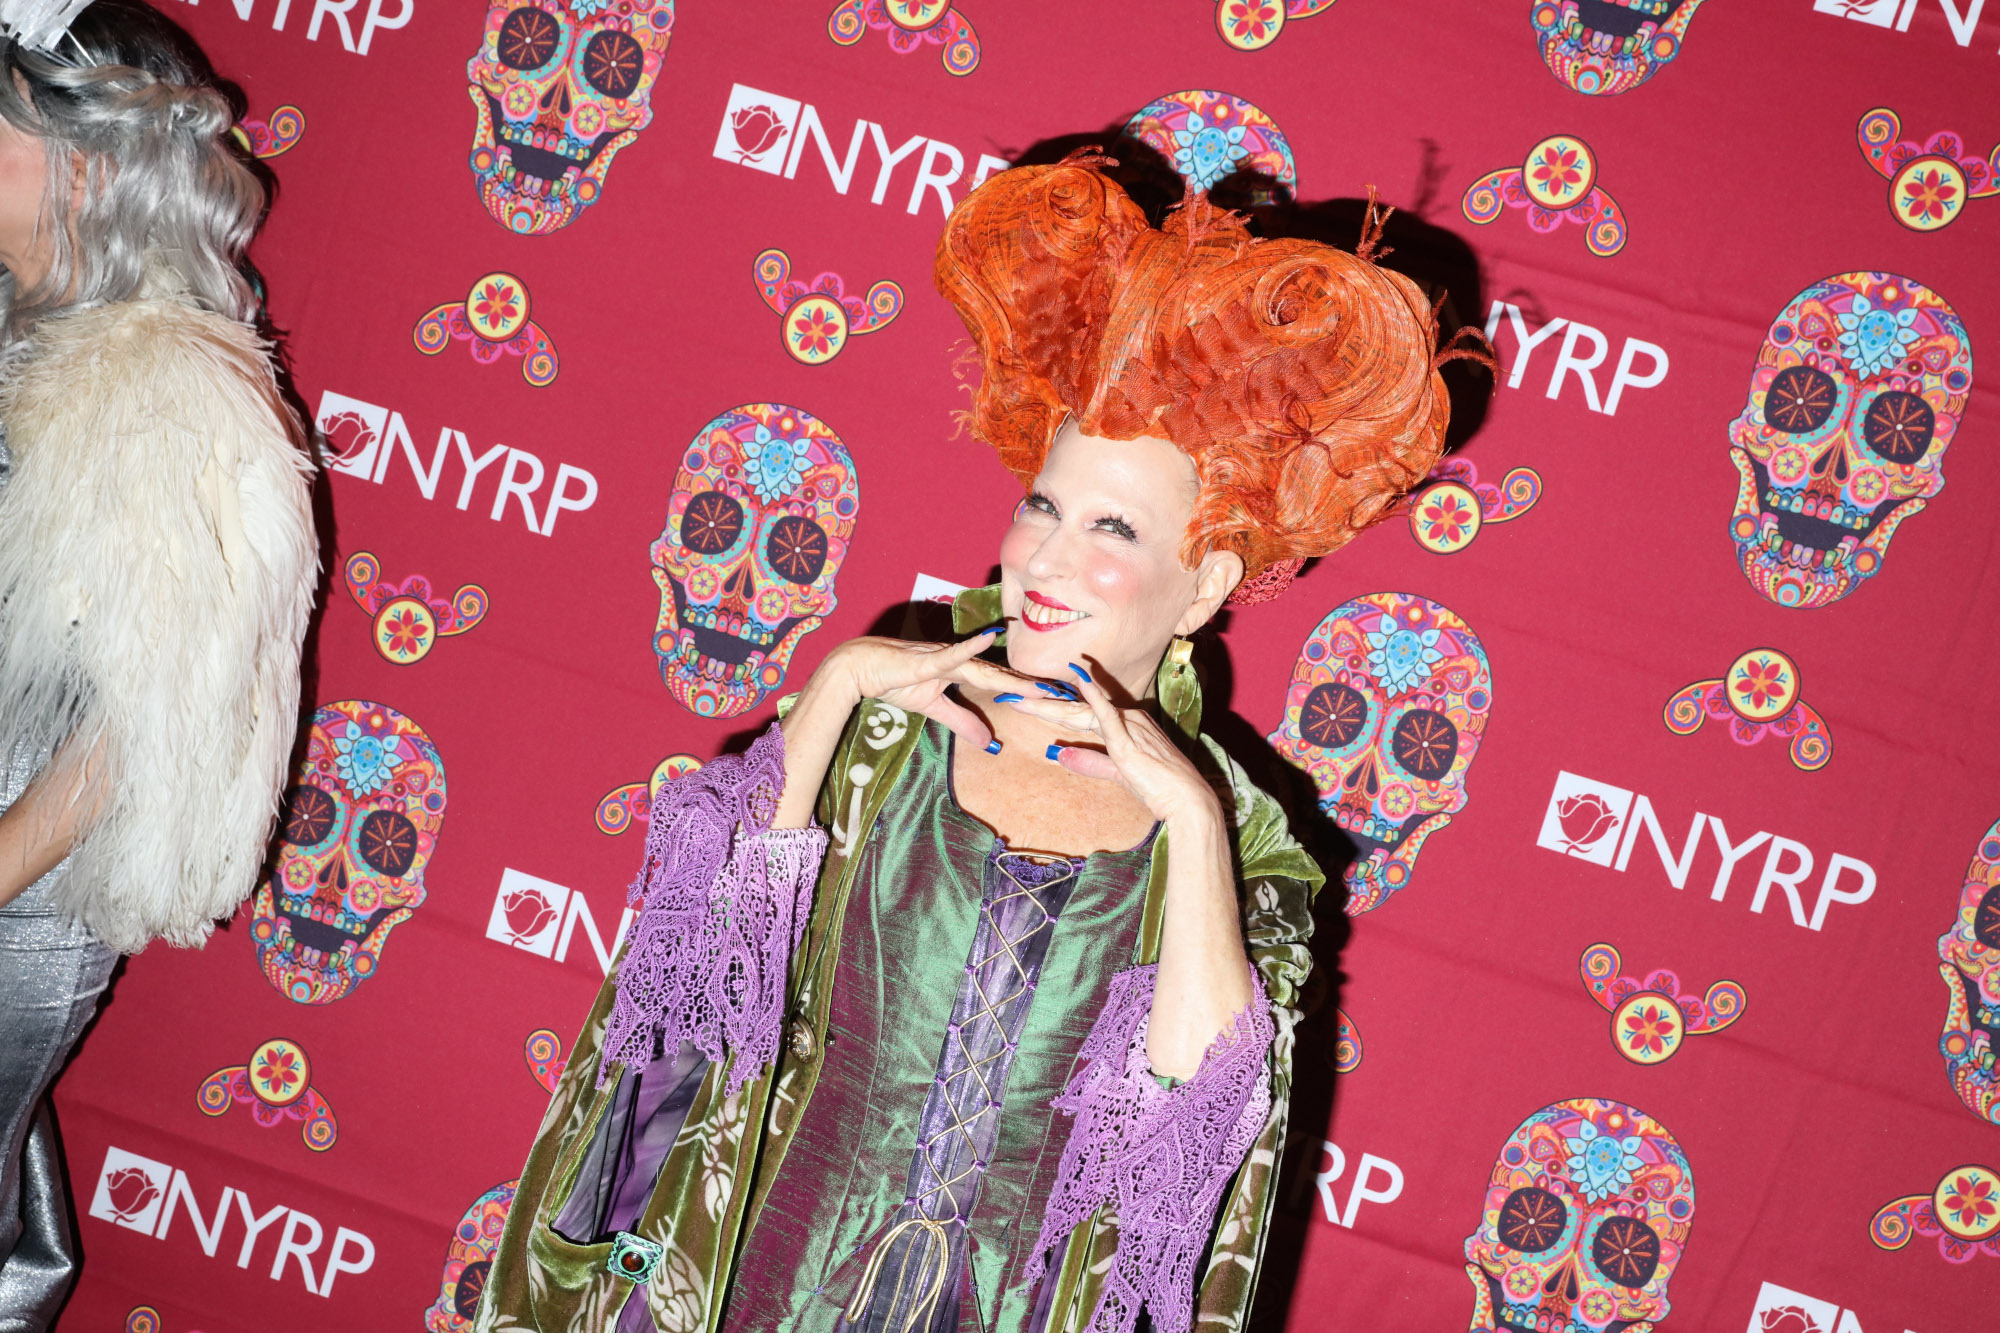 Bette Midler dressed as Winifred Sanderson from 'Hocus Pocus.' She's returning for 'Hocus Pocus 2' on Disney+. In the photo, she's wearing the witch's orange wig and green and purple dress. She's 1 of 3 witches in the cast of 'Hocus Pocus.'